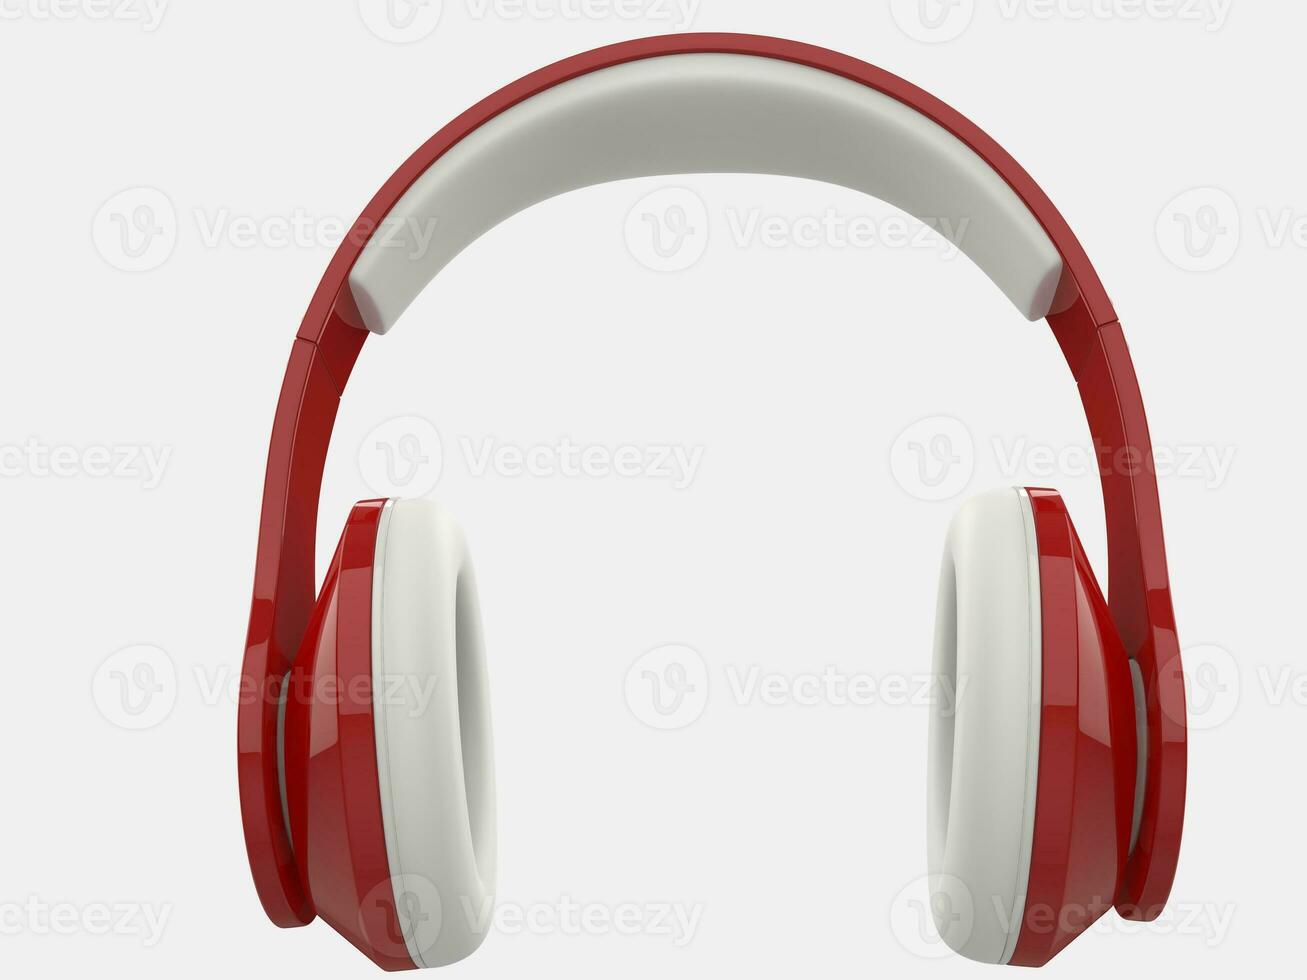 Modern red wireless headphones with white ear pads and details - closeup shot photo